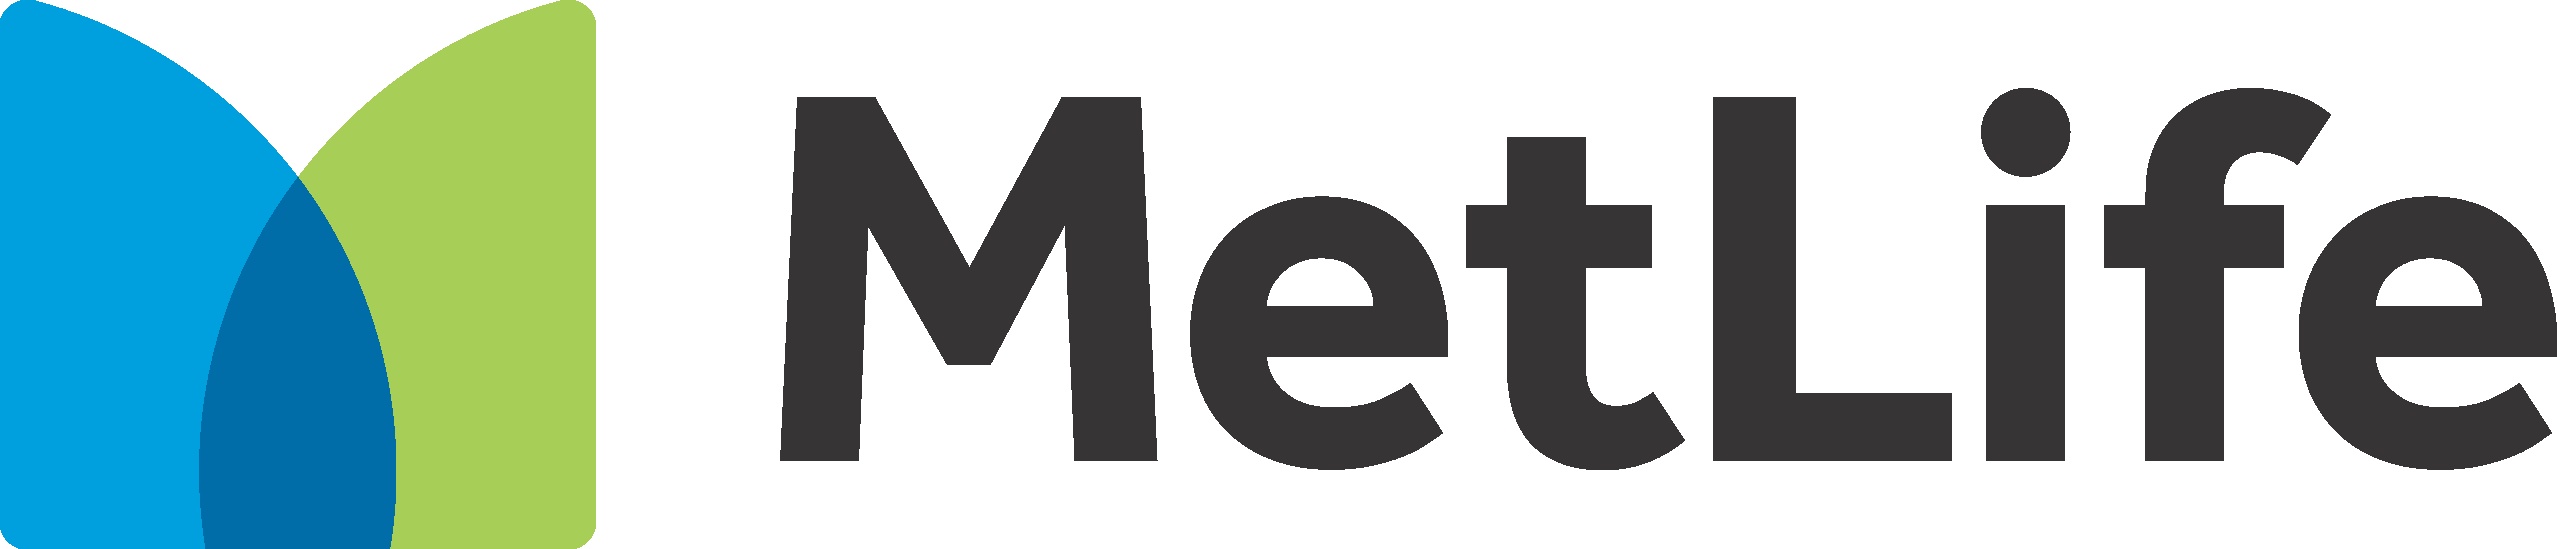 Metlife Insurance Review Pros And Cons Nerdwallet